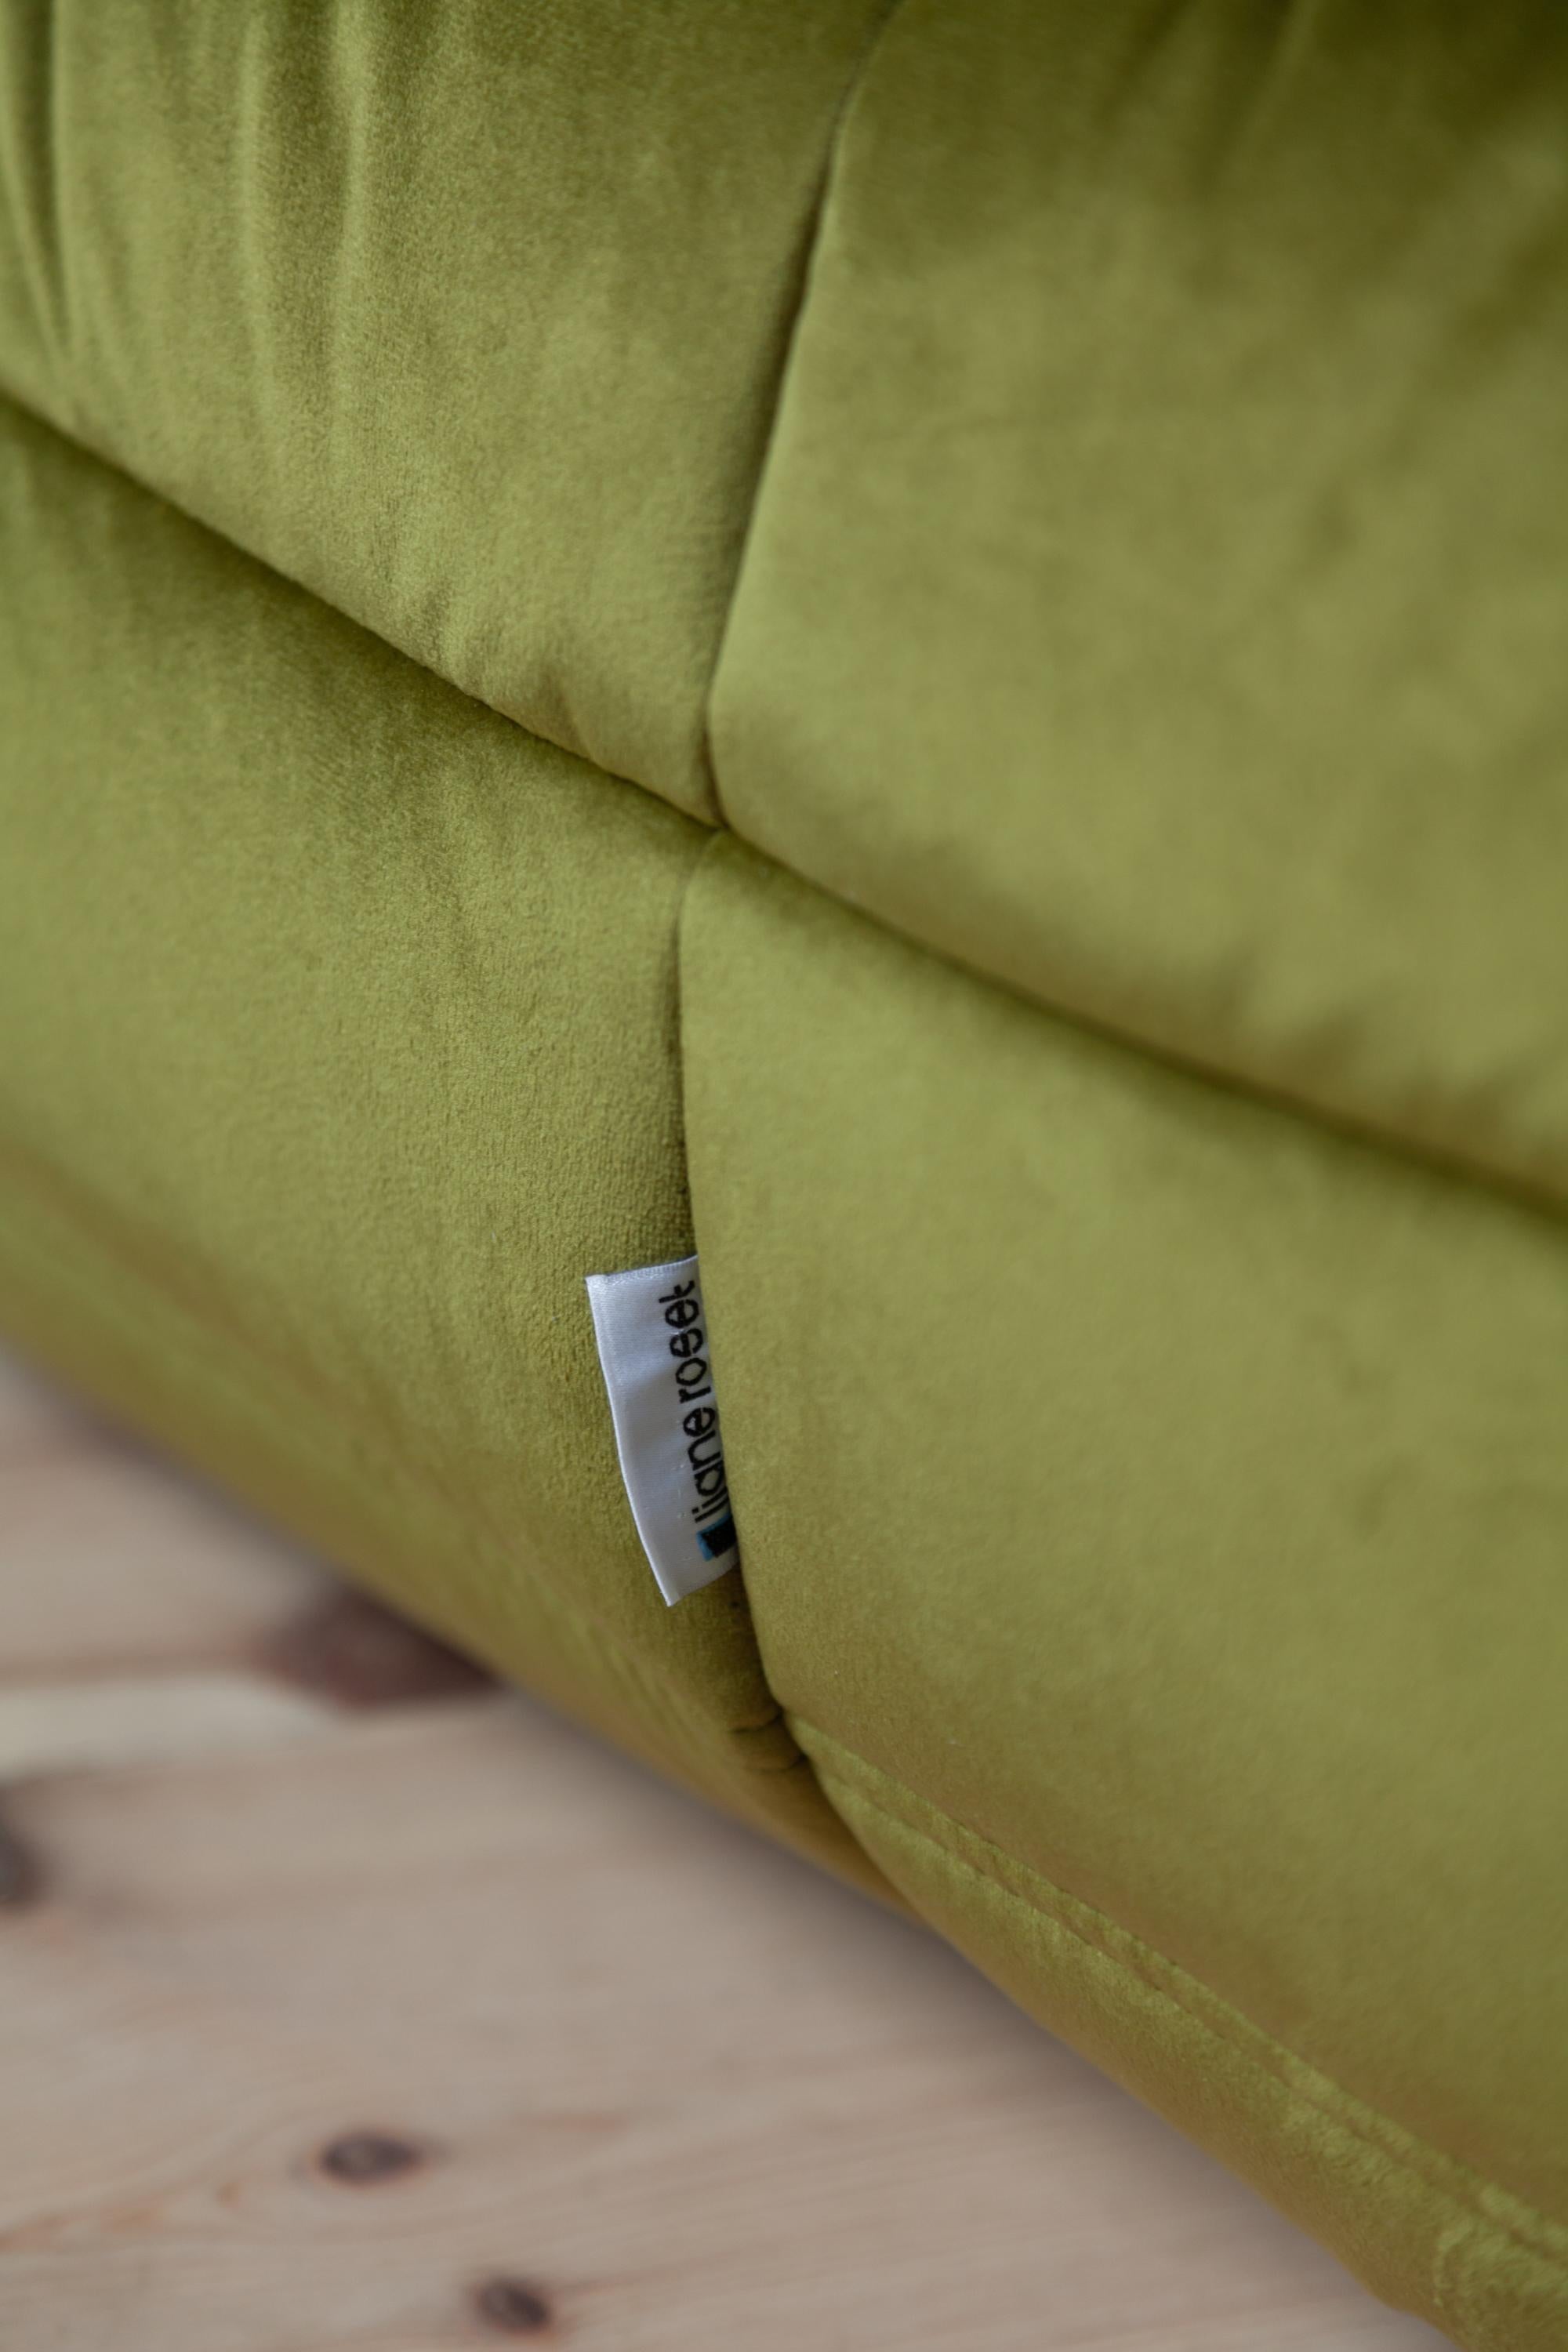 Togo sofa VELVET by Michel Ducaroy for Ligne Roset.  
Togo was designed in 1973.
This set is made of 2 modules: 2 seater and ottoman
the dimension of ottoman  W87, D80, H34
The upholstery is new - green olive velvet, 
It is possible to order more